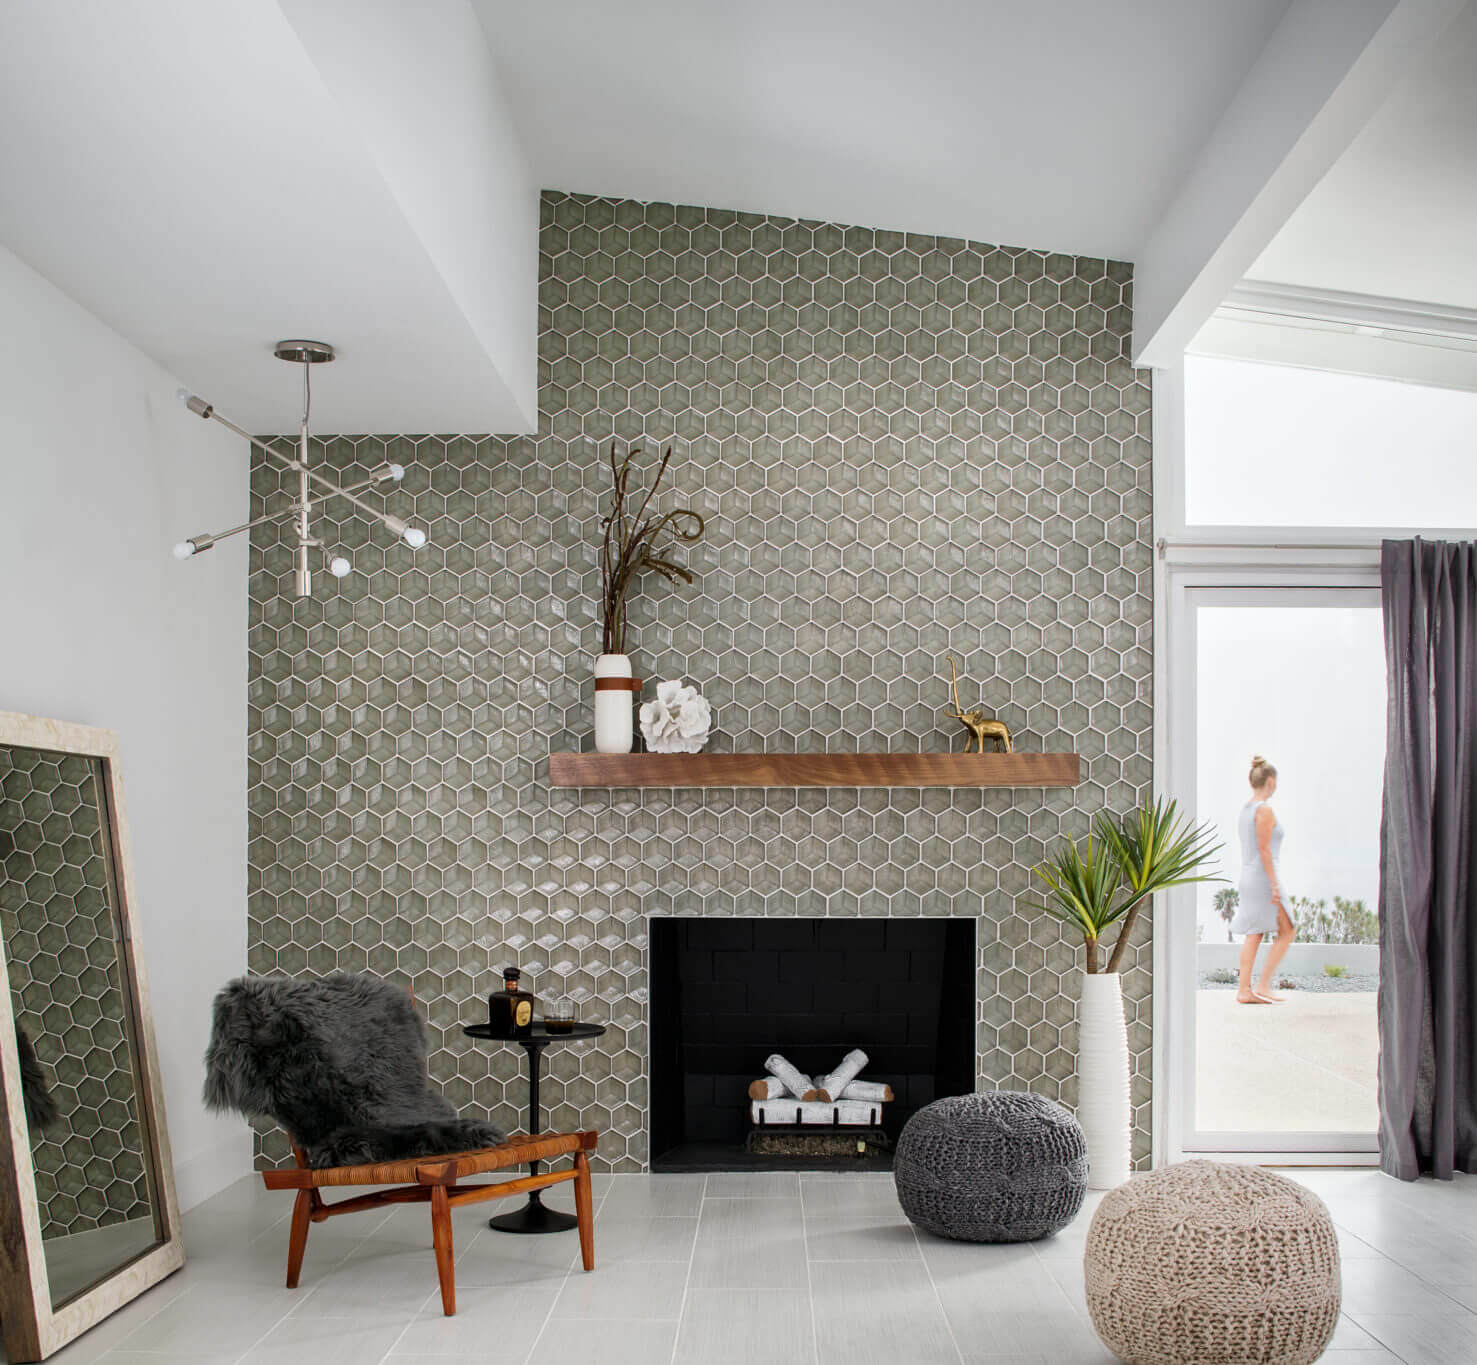 Hexagon tile wall and fireplace surround